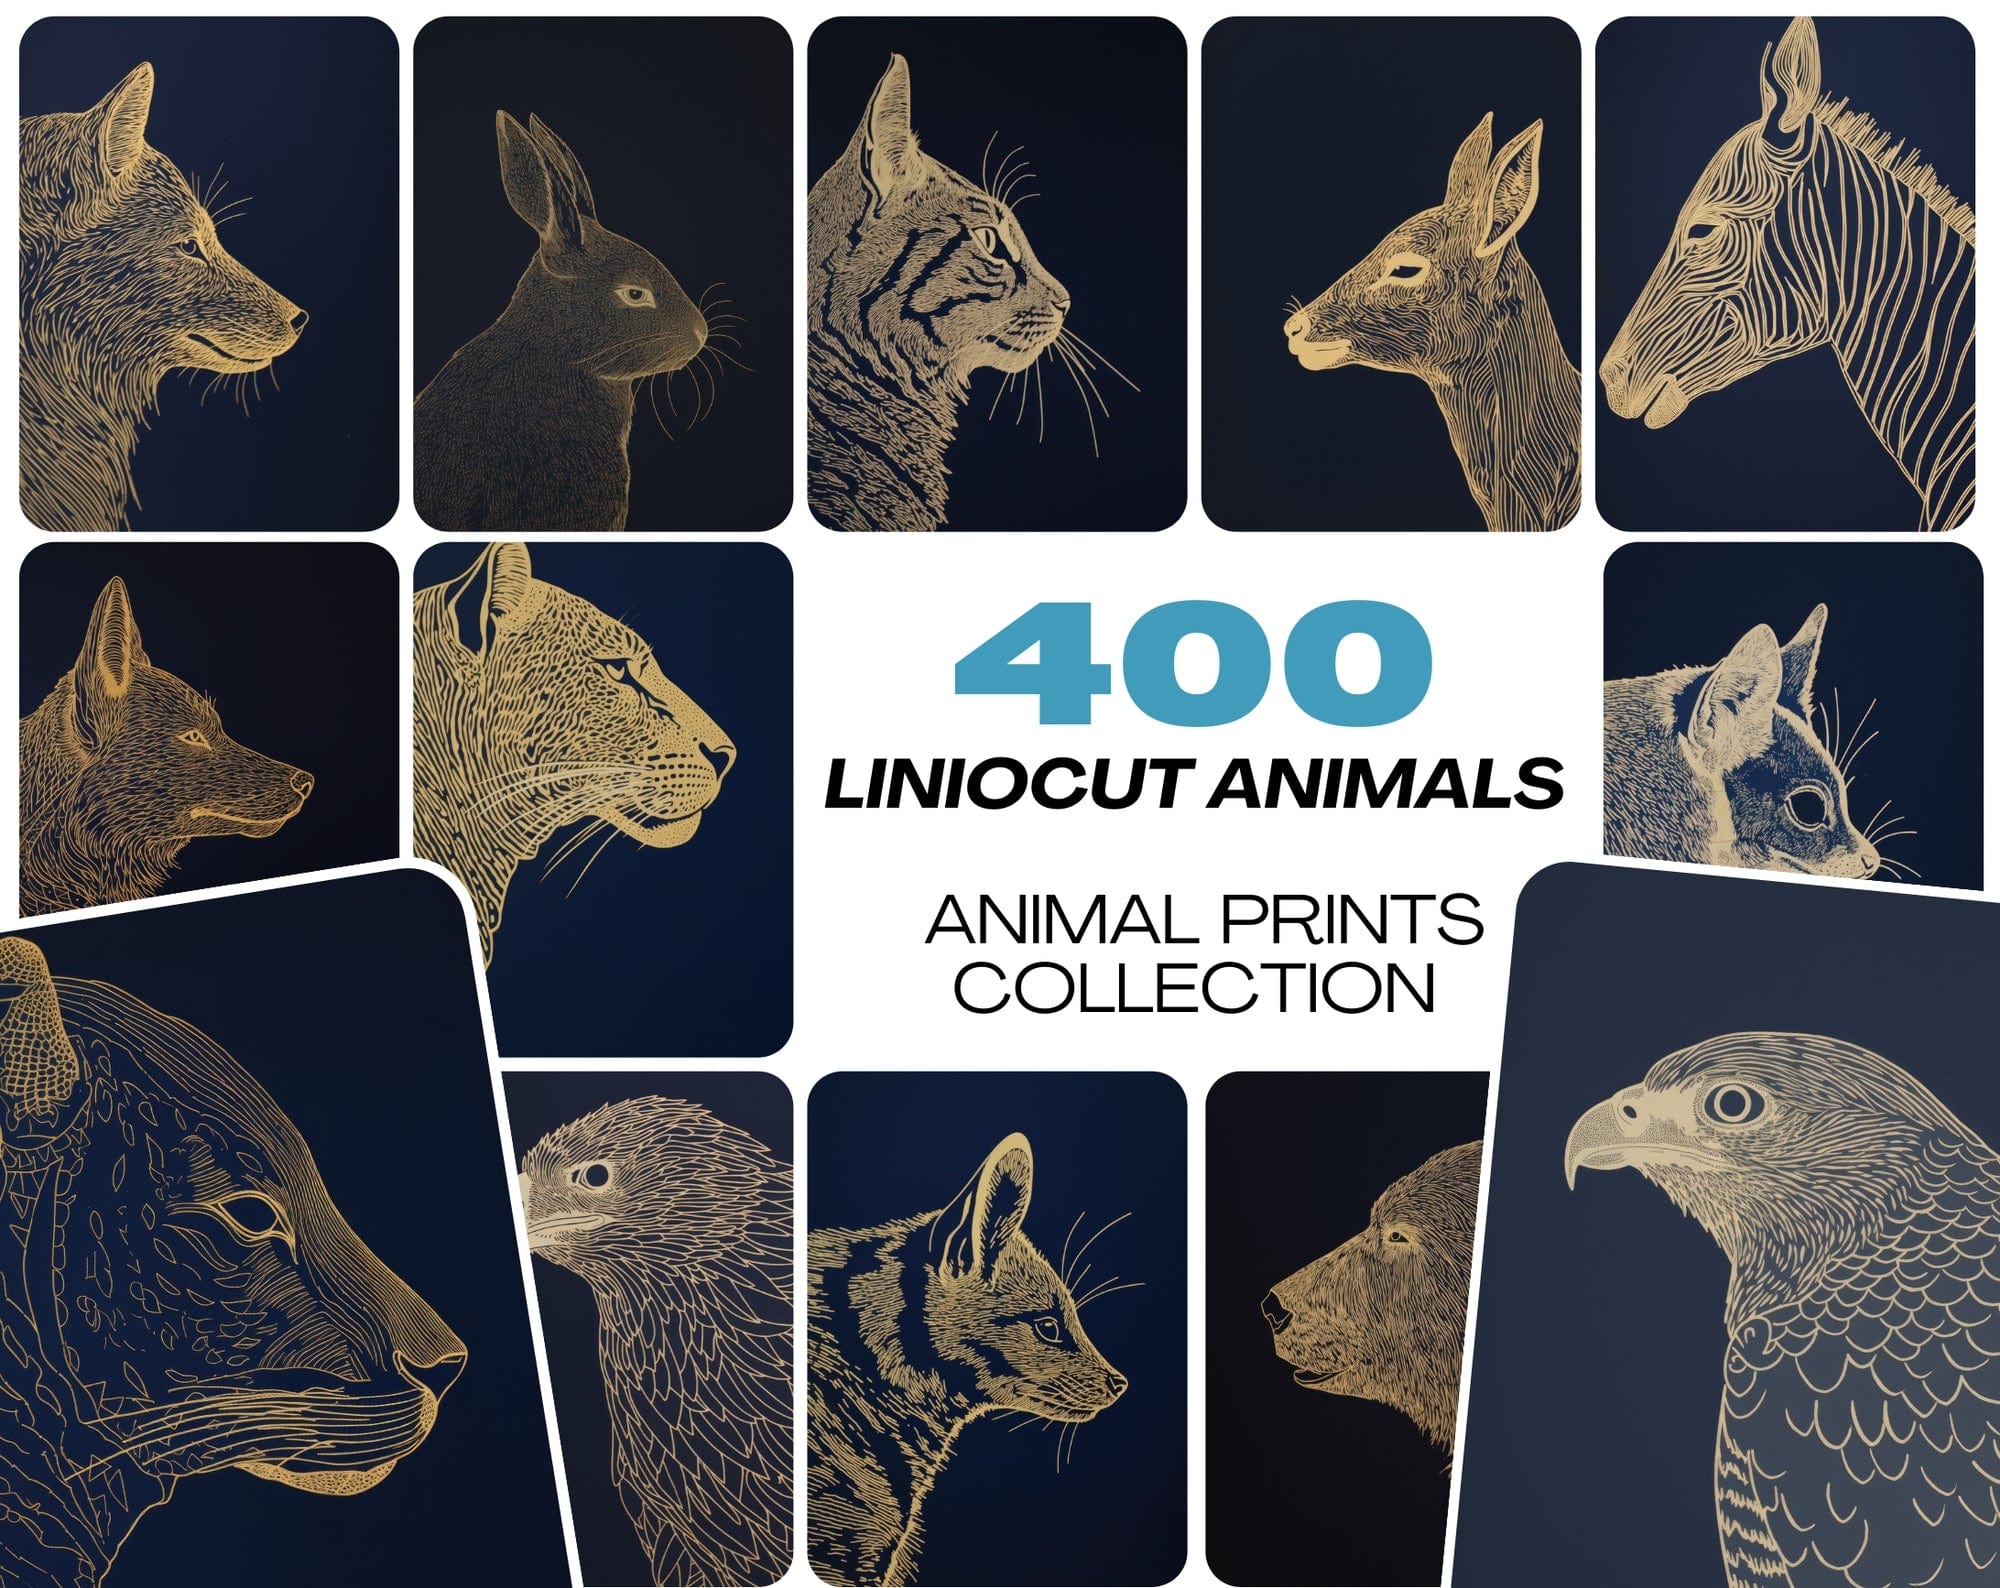 A Comprehensive Collection of 400 Animals Captured in the Timeless Art of Linocut Printmaking Digital Download Sumobundle